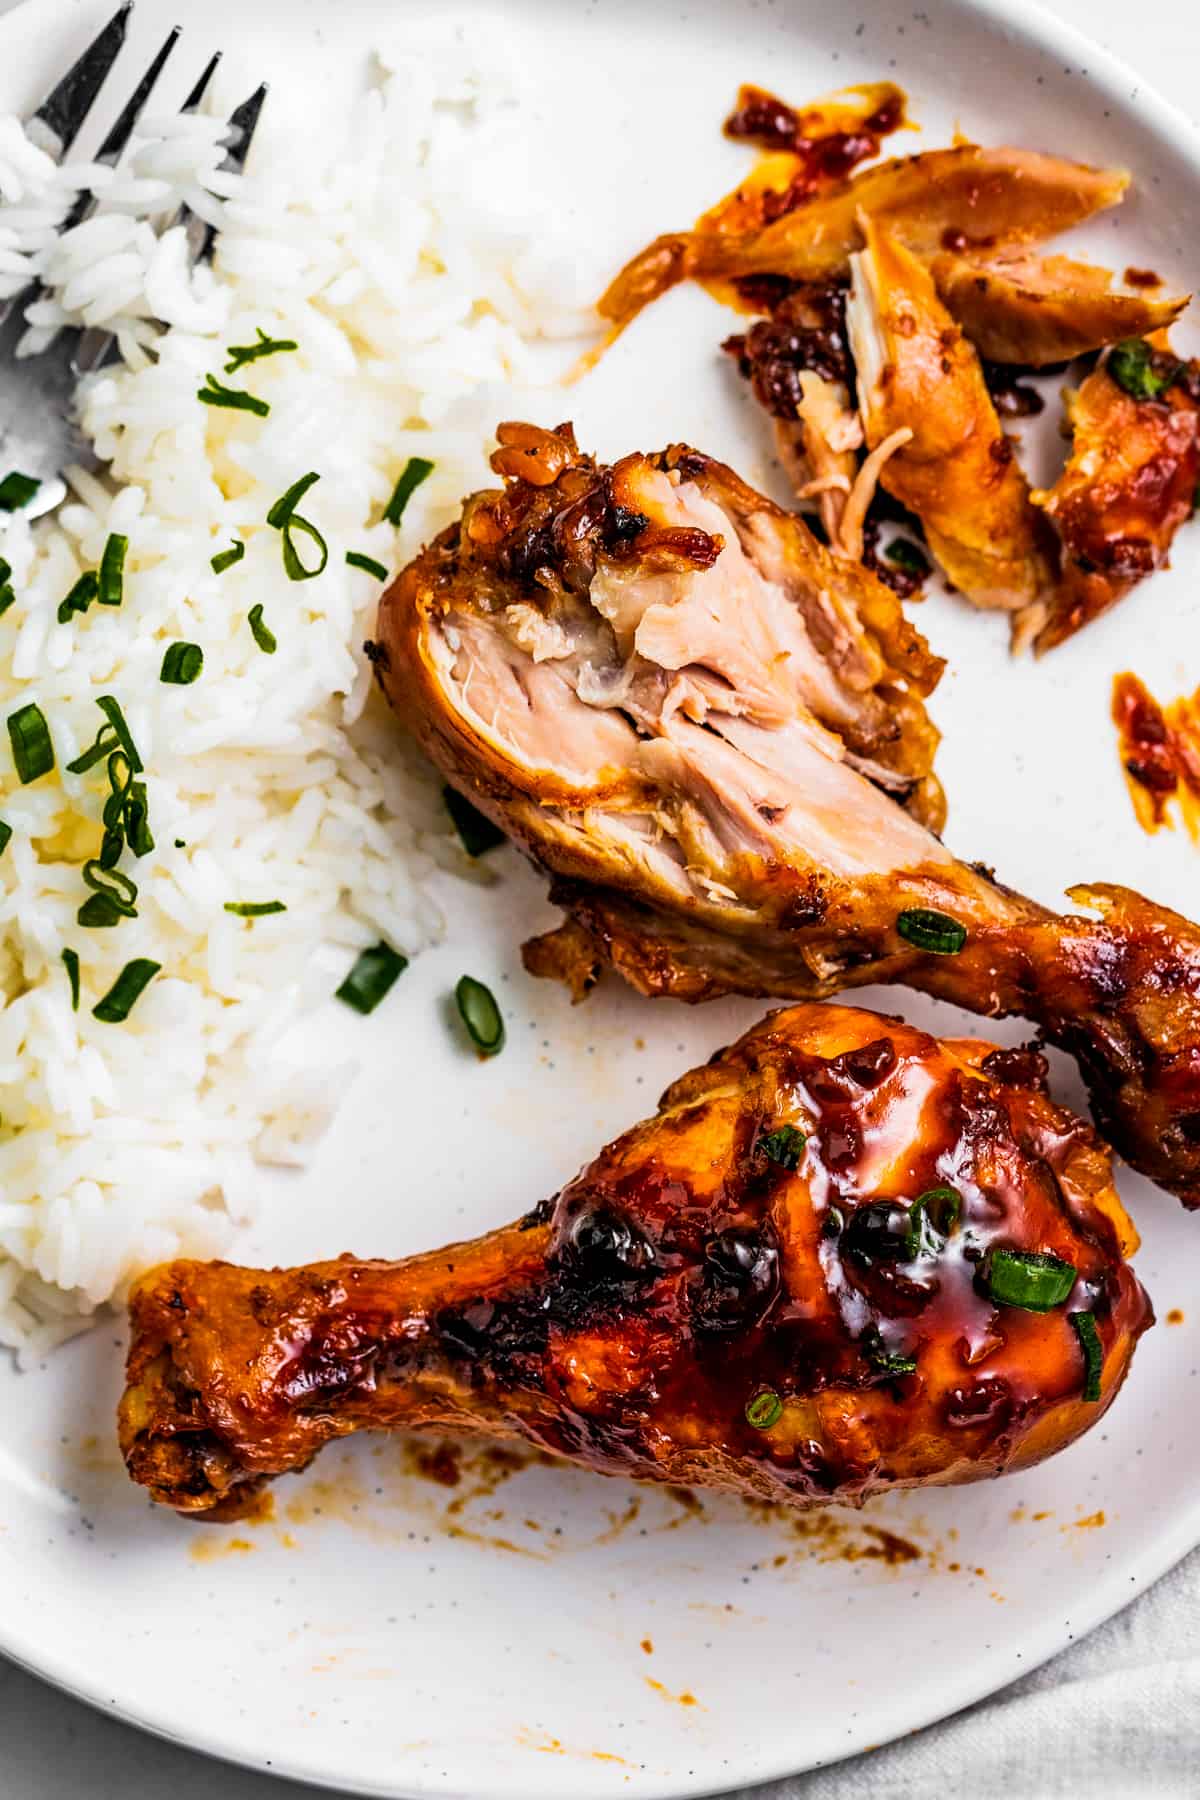 Chicken drumsticks on a plate with white rice.